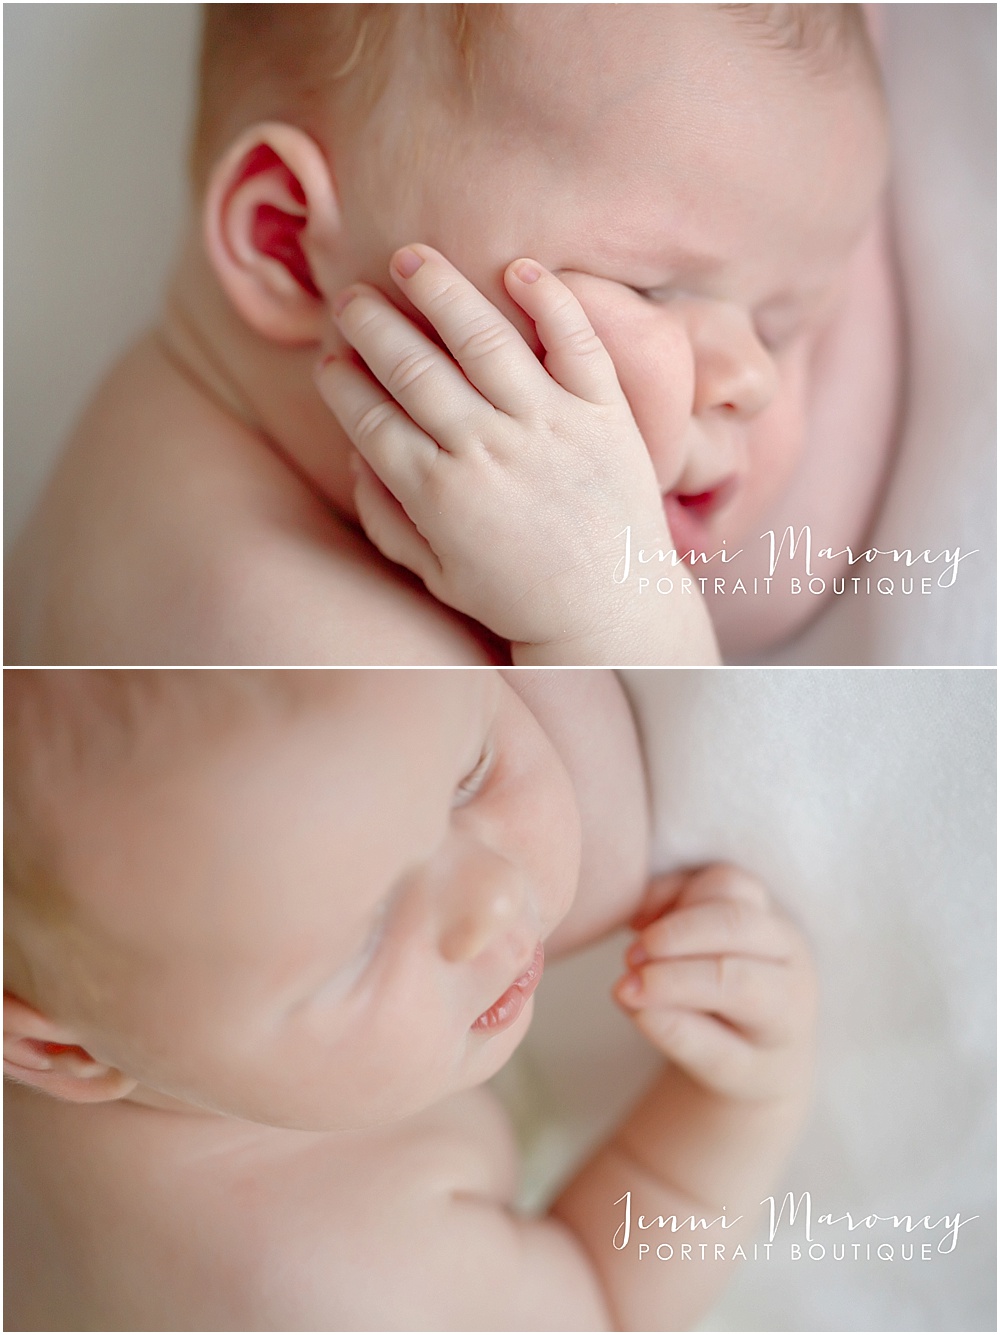 Denver newborn photographer and Boulder baby photographer, Jenni Maroney shares an in-studio all natural newborn photography session with a little baby boy. 